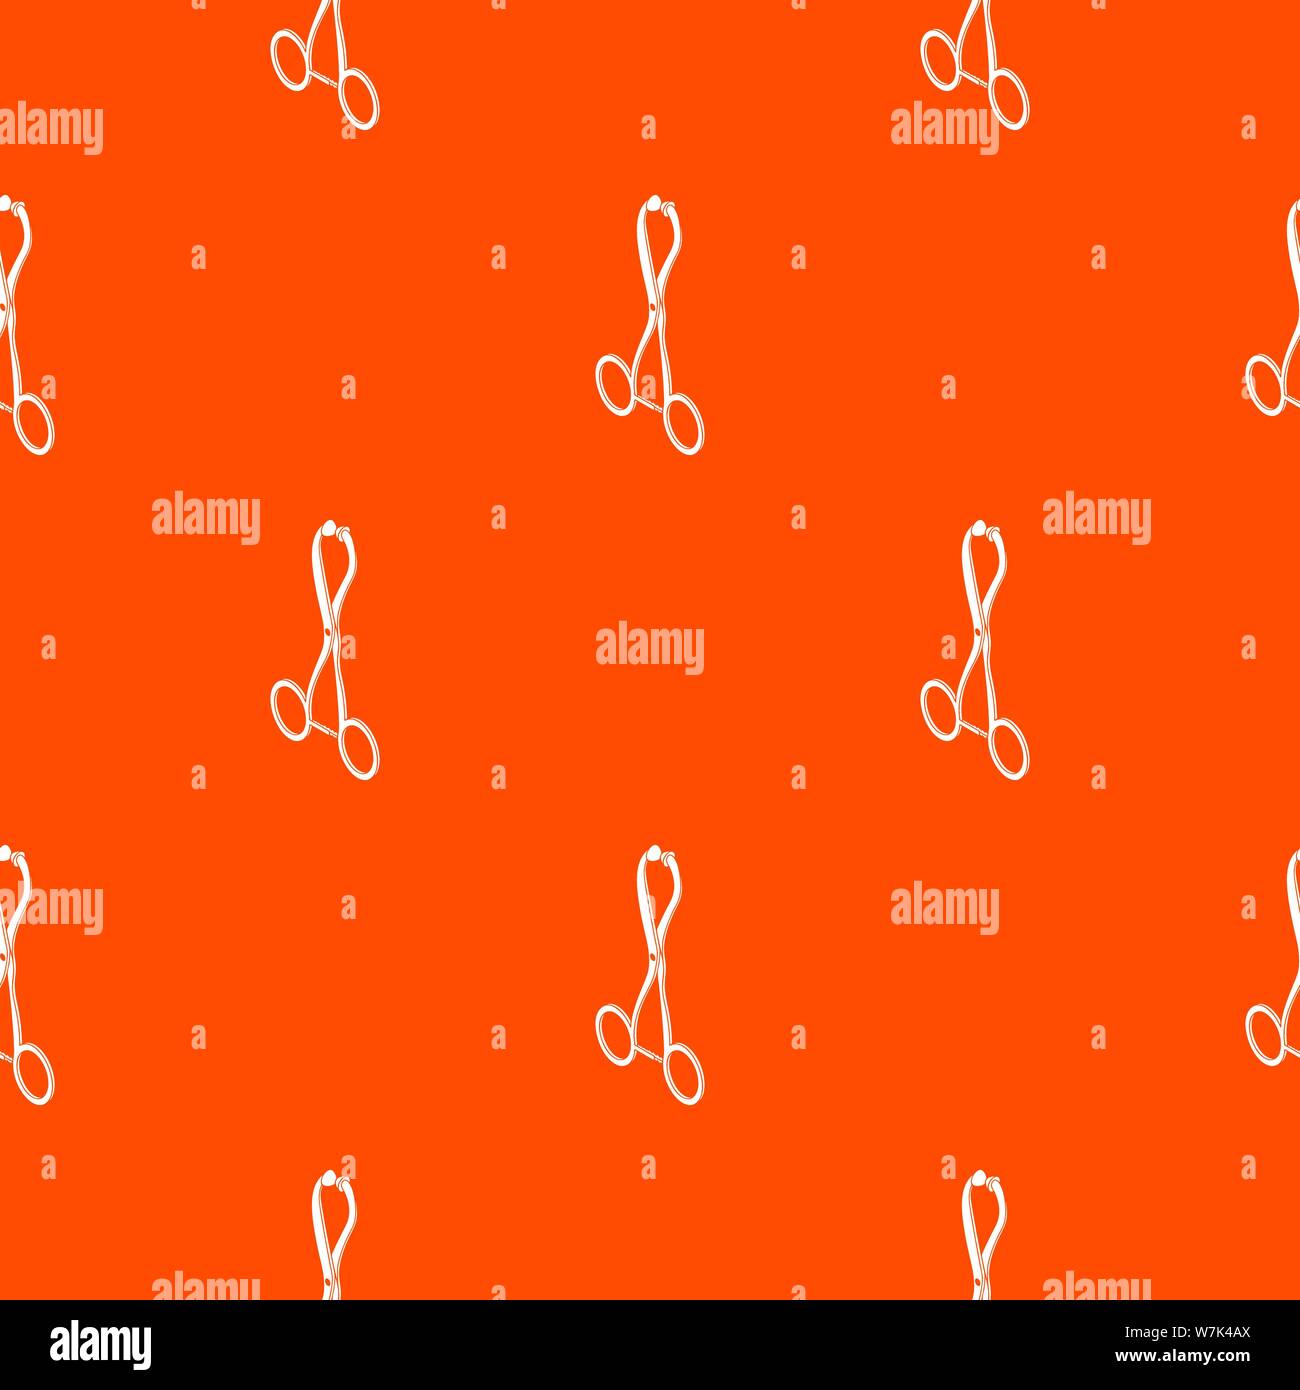 Surgical clipper pattern vector orange Stock Vector